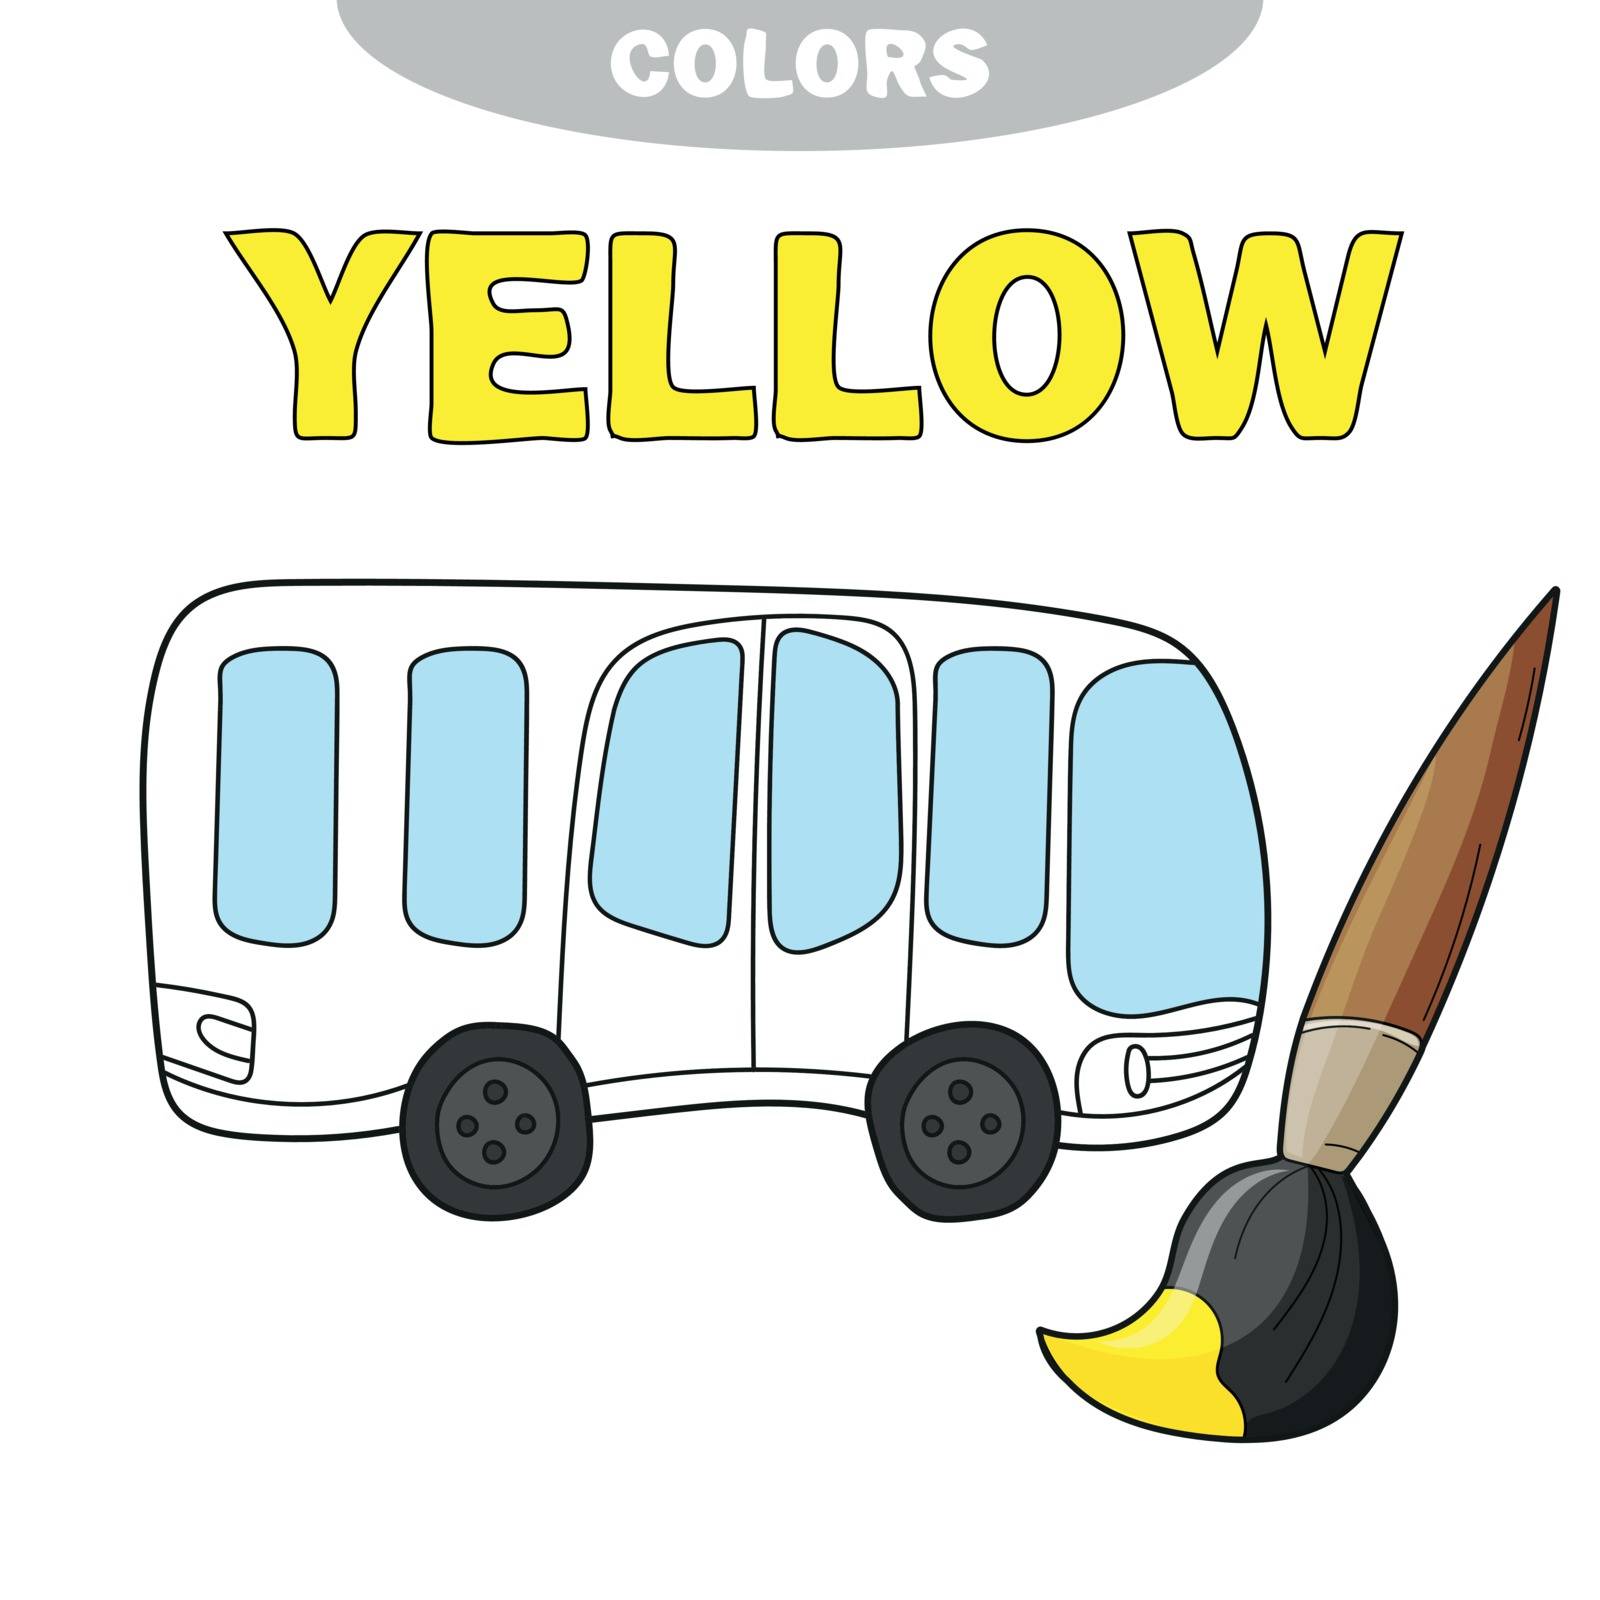 School bus coloring page, back to school concept, kids school vector illustration, school bus isolated on white background. Kids activity. Learn thr color - yellow